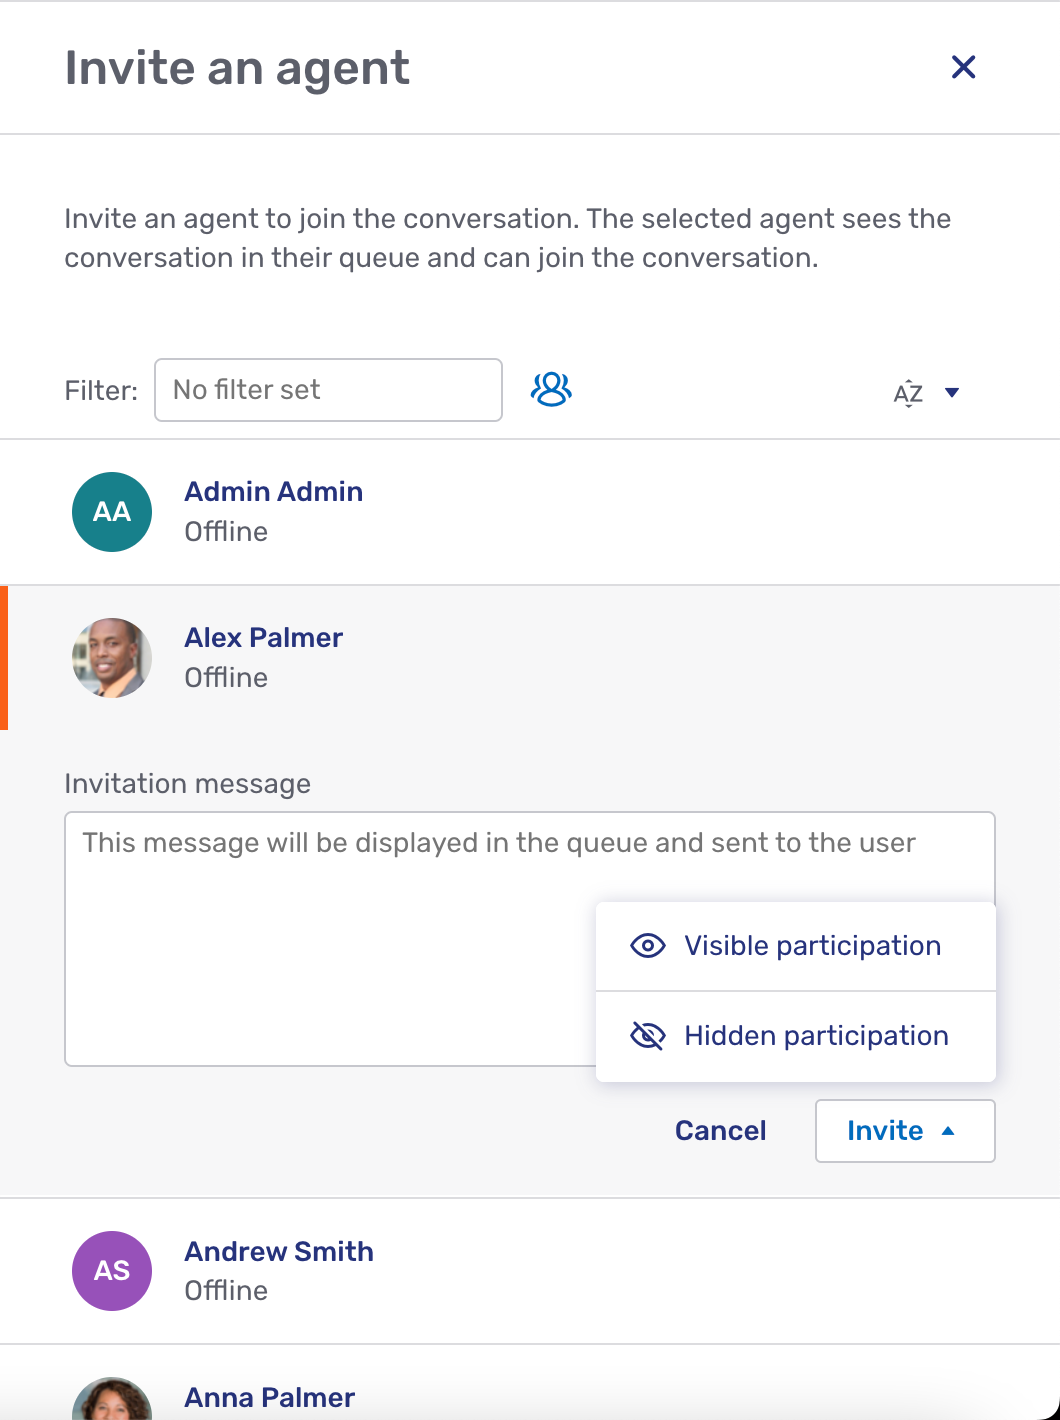 Invite an agent as a hidden participant fly-in page